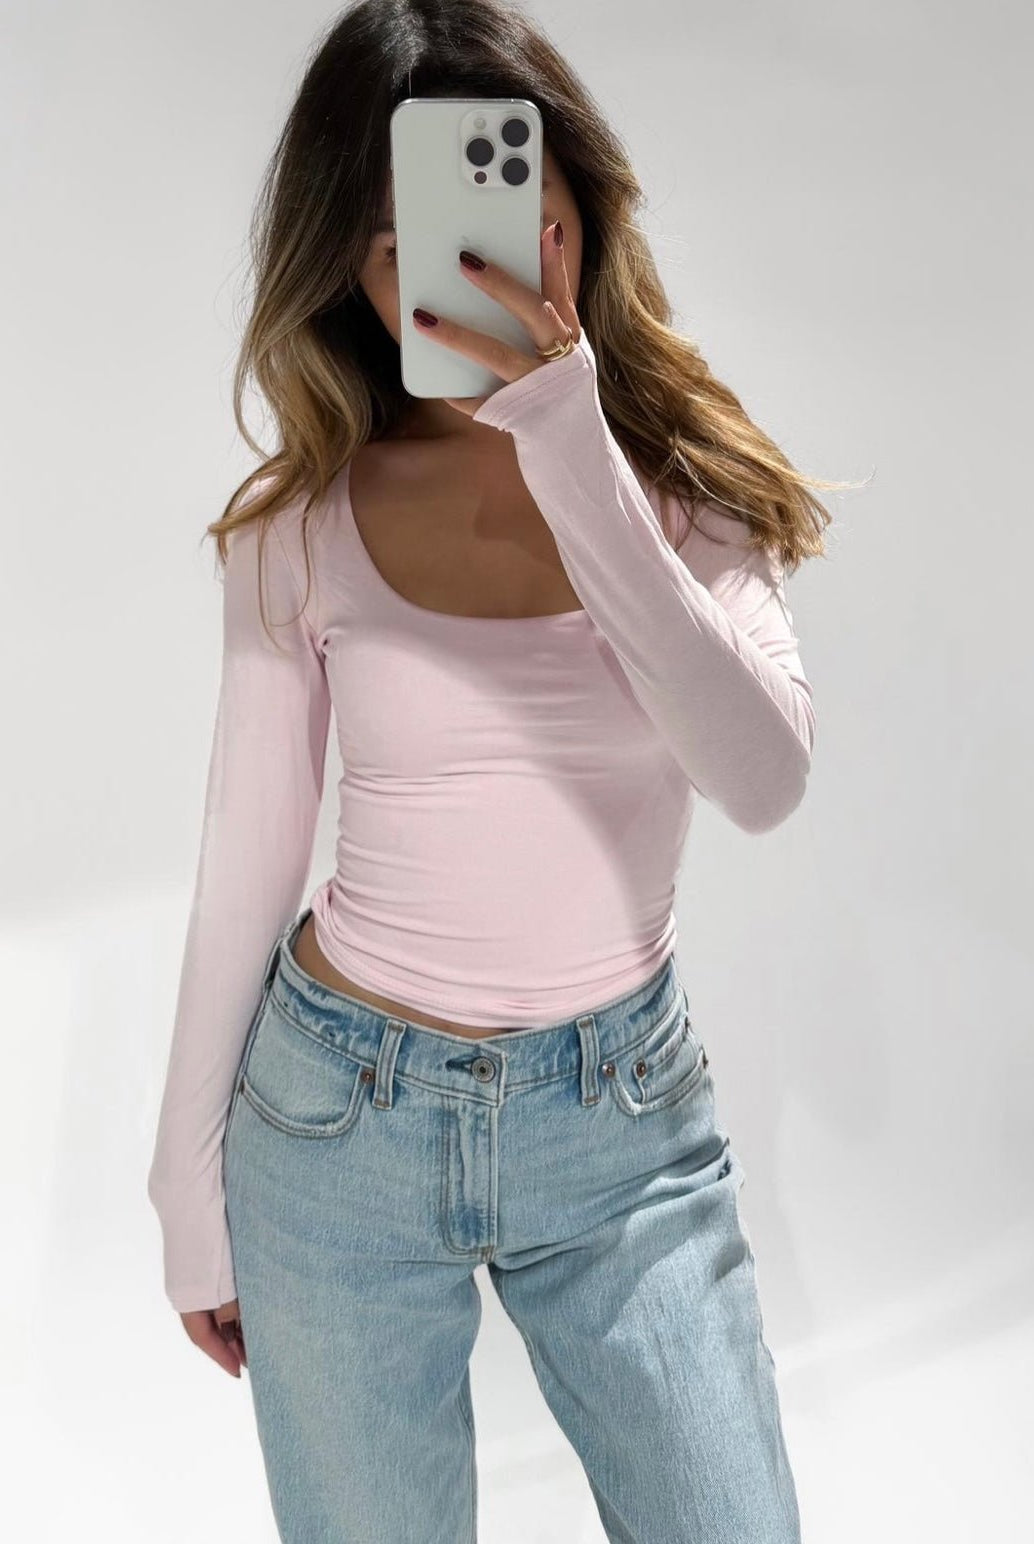 ♥︎ZOLA TOP BABY PINK (PRE ORDER) - My Favourites